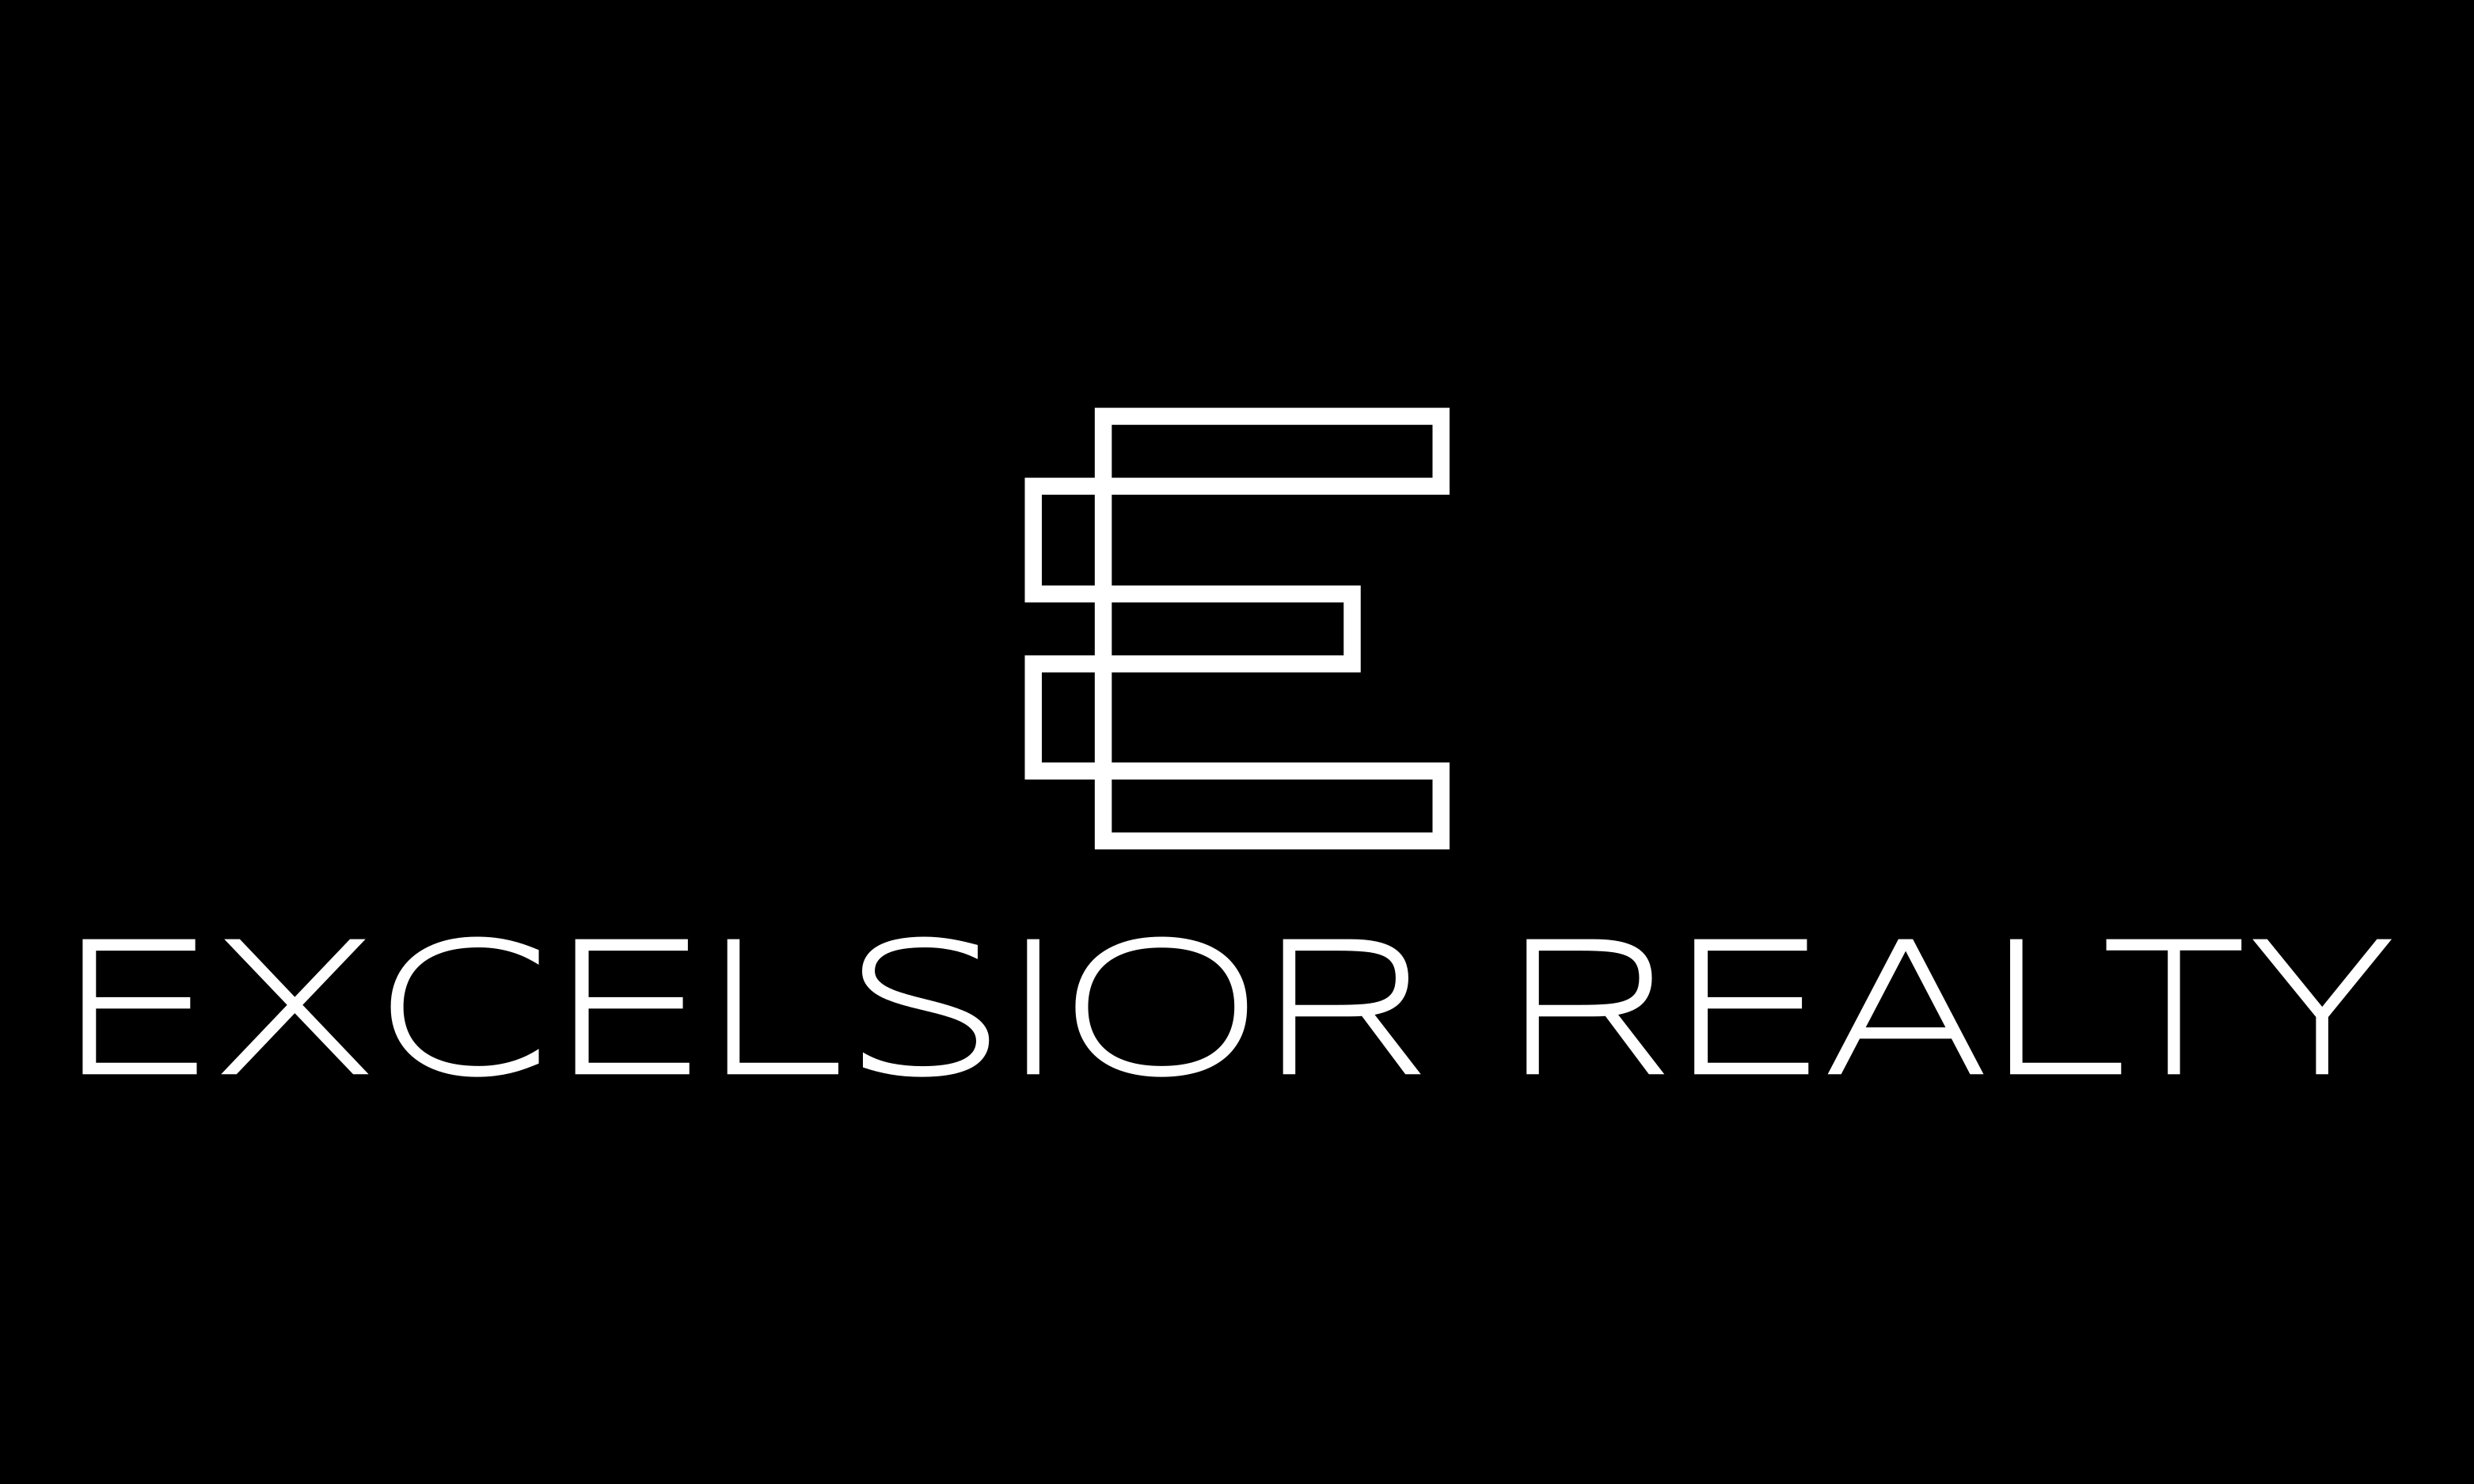 Excelsior Realty, Tuesday, April 26, 2022, Press release picture